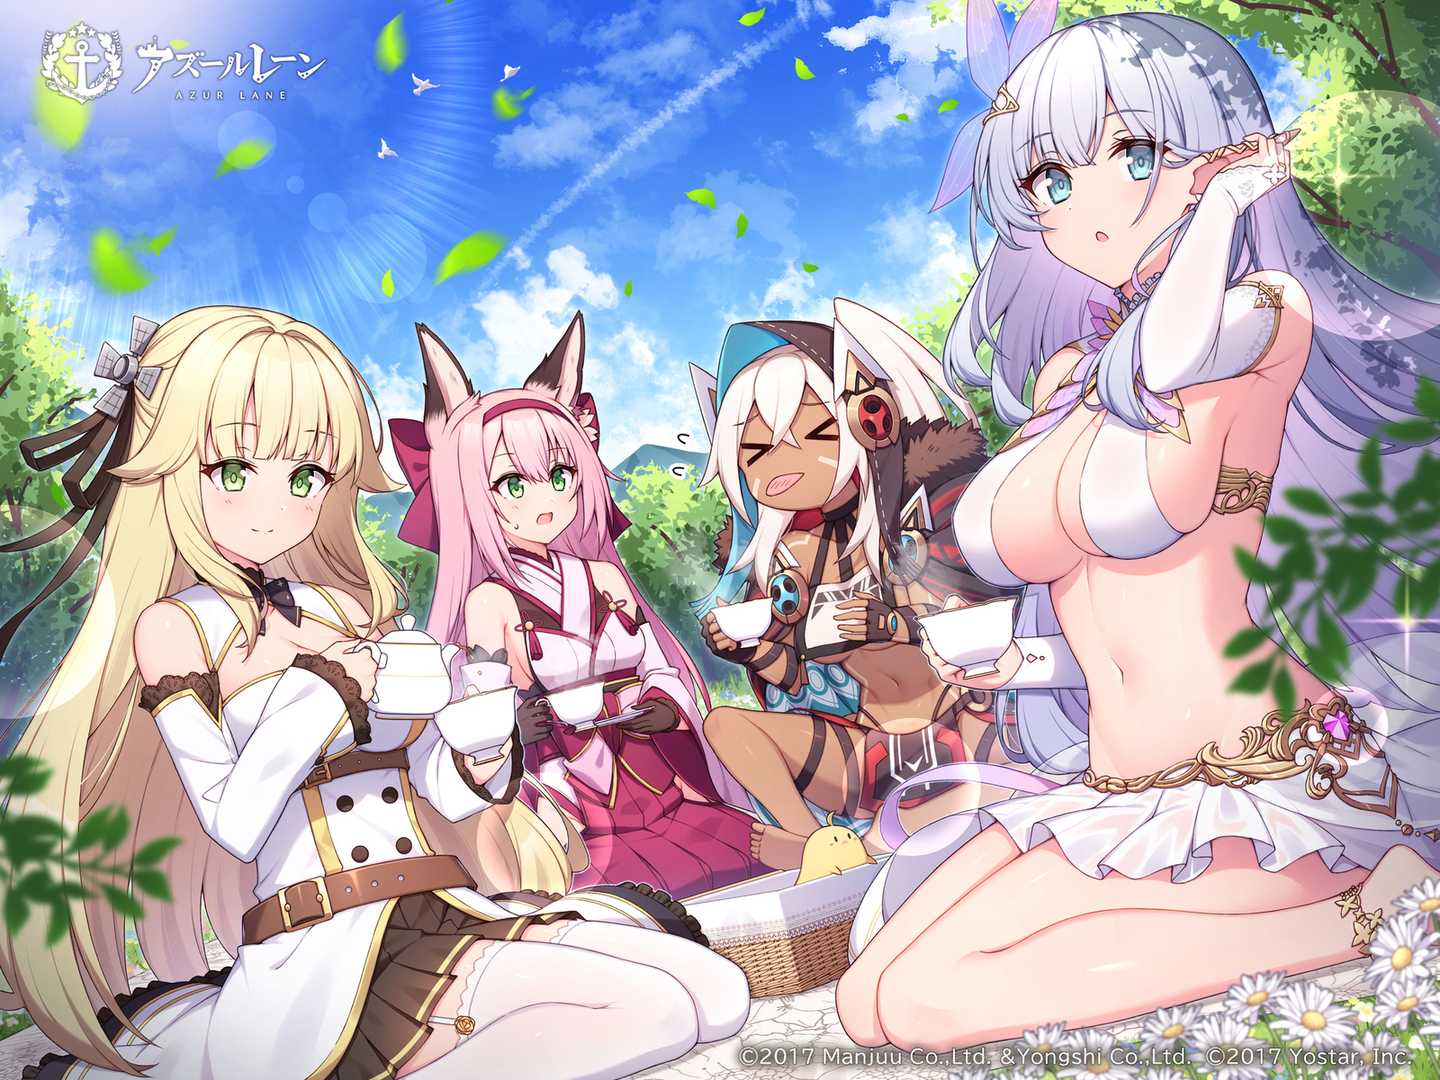 Anime 1440x1080 Azur Lane anime girls anime girls eating leaves big boobs picnic flowers sky clouds tongue out closed eyes fox girl fox ears gloves belly belly button long hair sunlight stockings